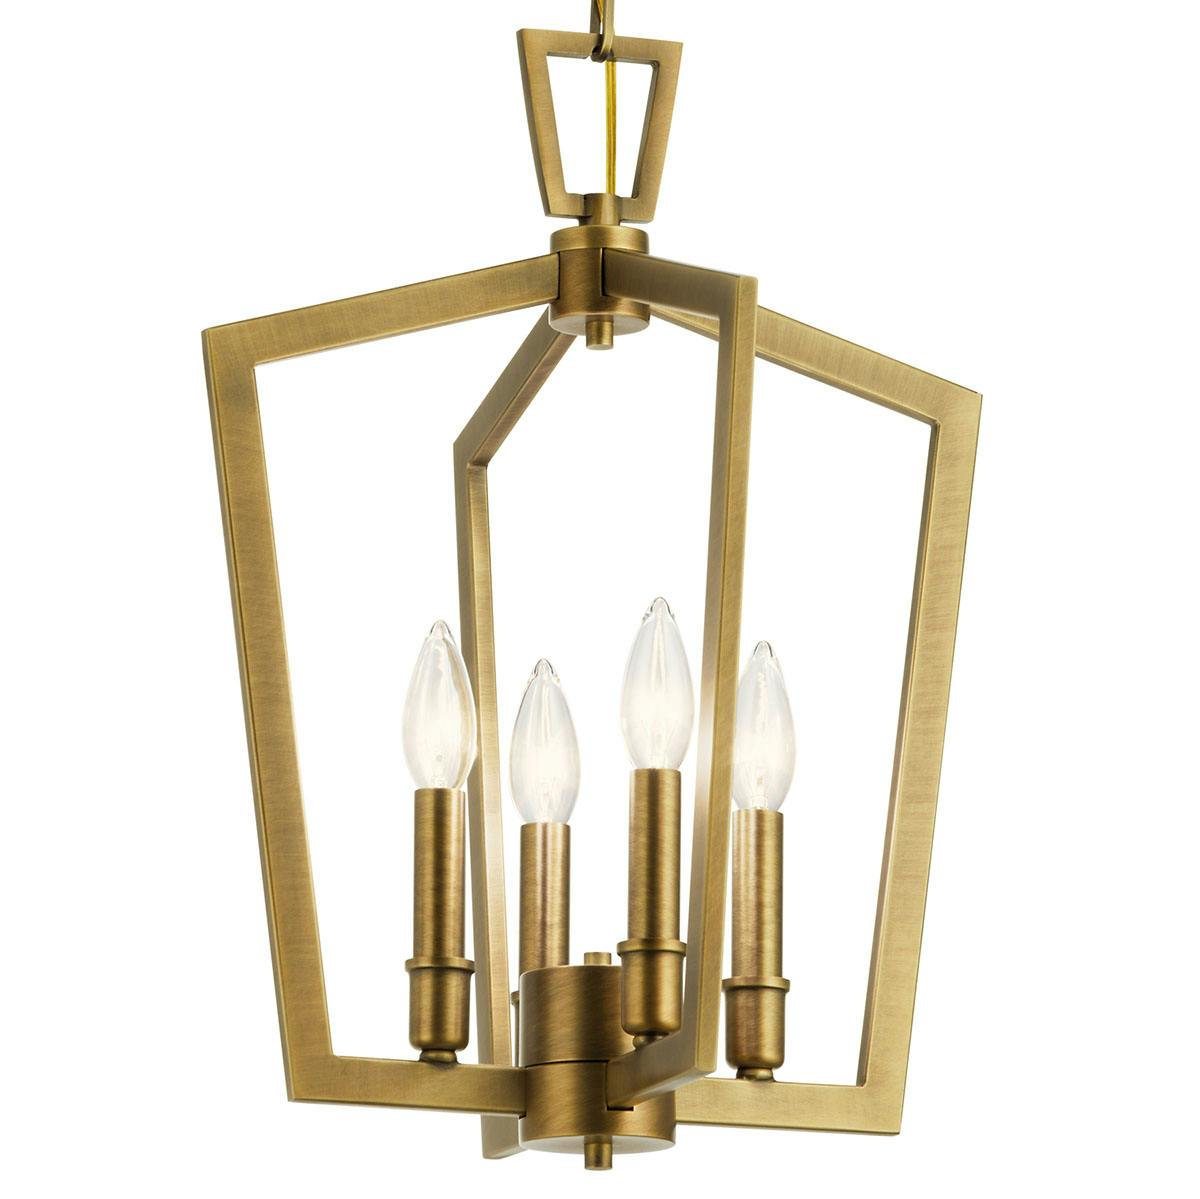 Close up view of the Abbotswell 19" 4 Light Pendant Brass on a white background